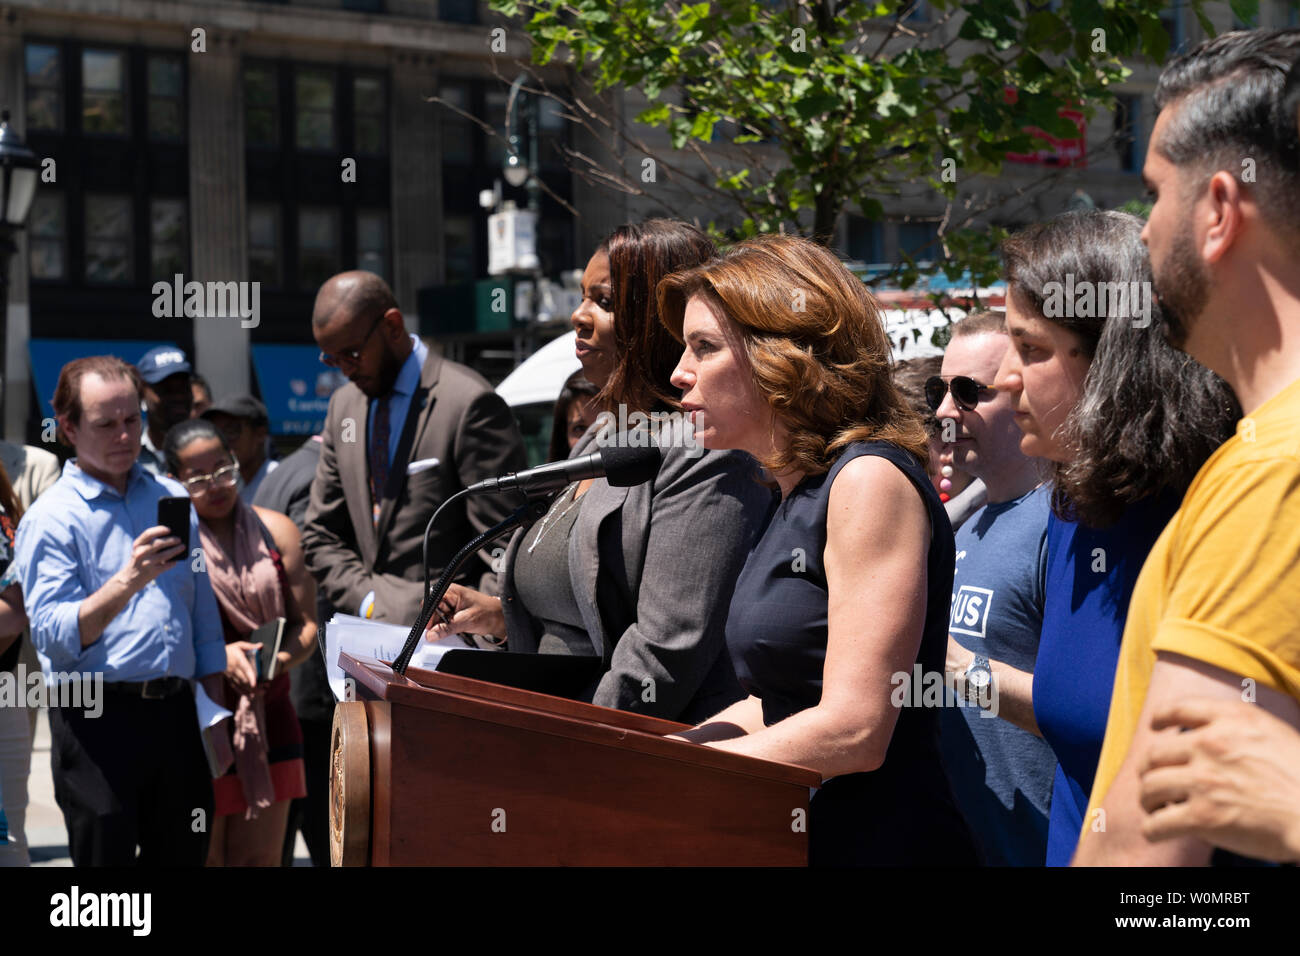 New York, NY - June 27, 2019: NYC Census Director Julie Menin speaks at press conference to react on Supreme Court ruling on the U.S. Census citizenship question at Foley Square Stock Photo